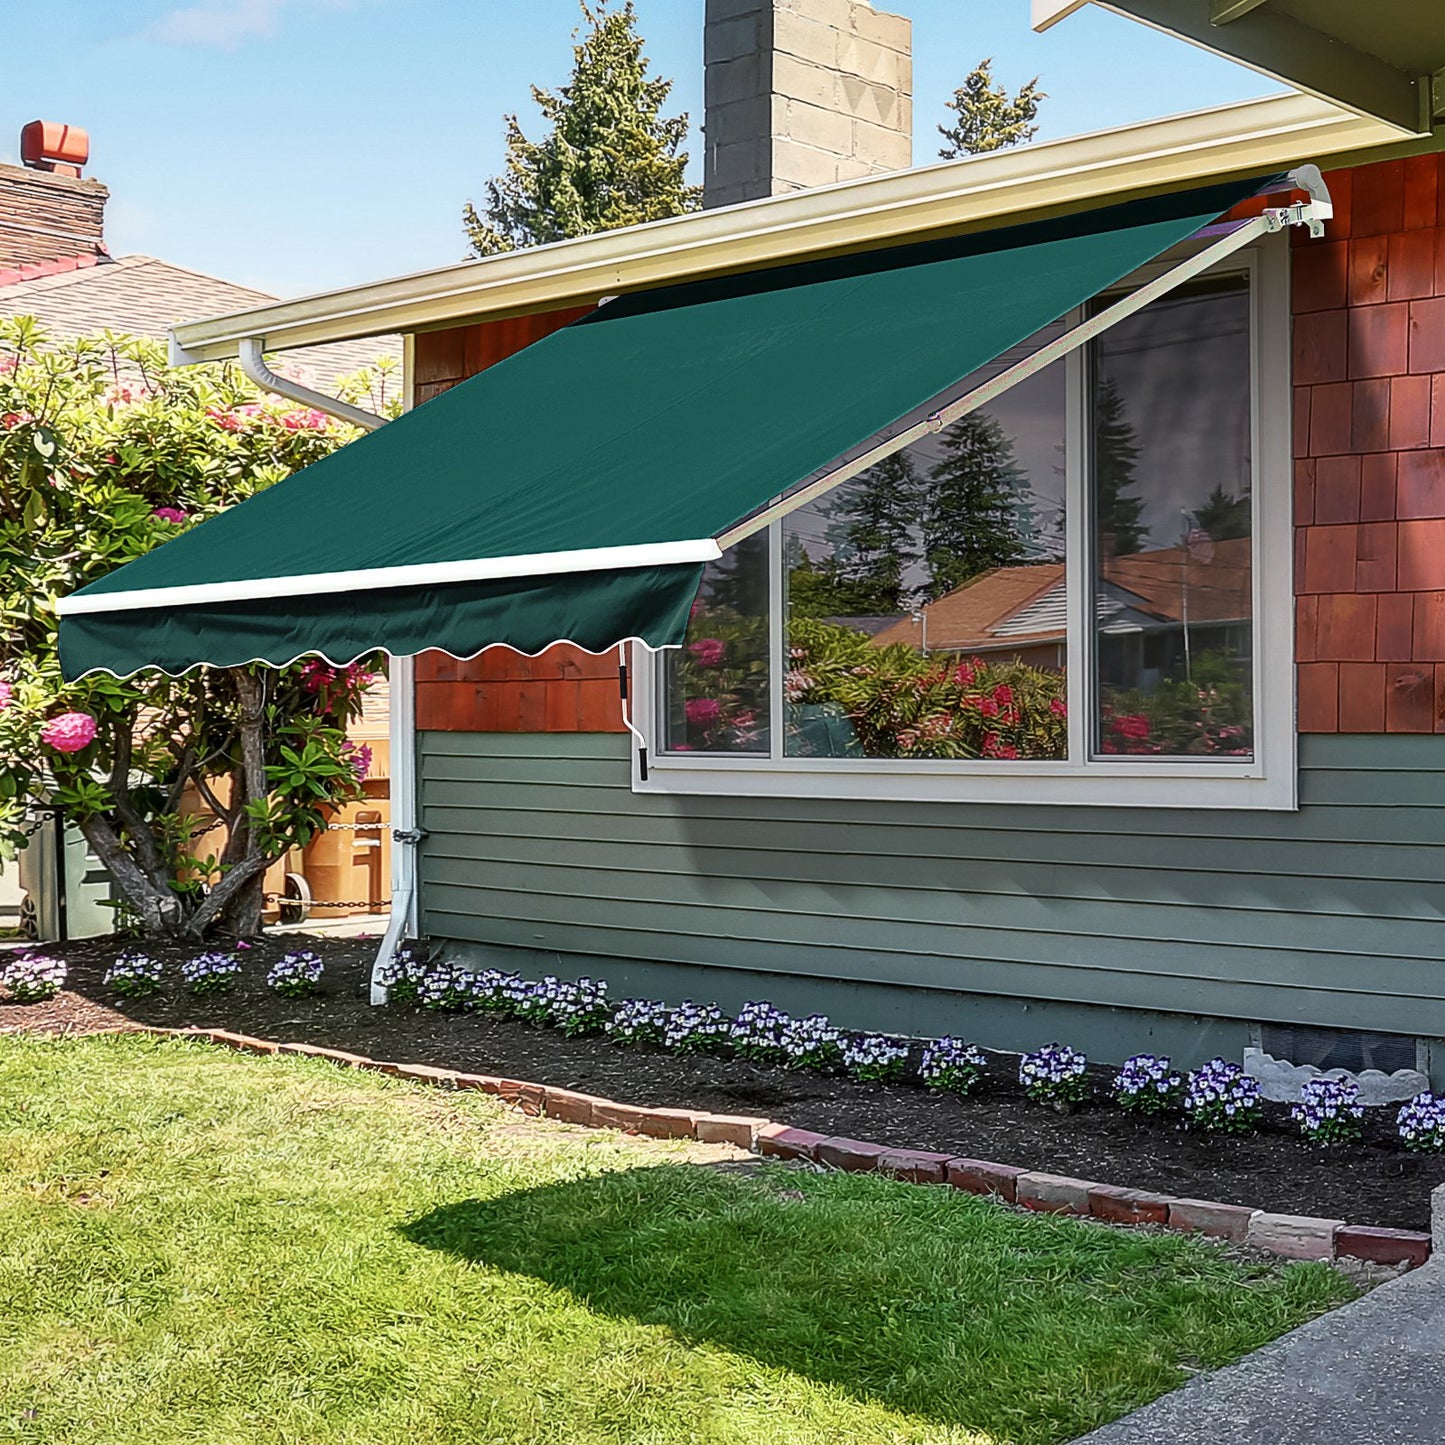 Outsunny Manual Retractable Awning, 3.5x2.5 m-Green